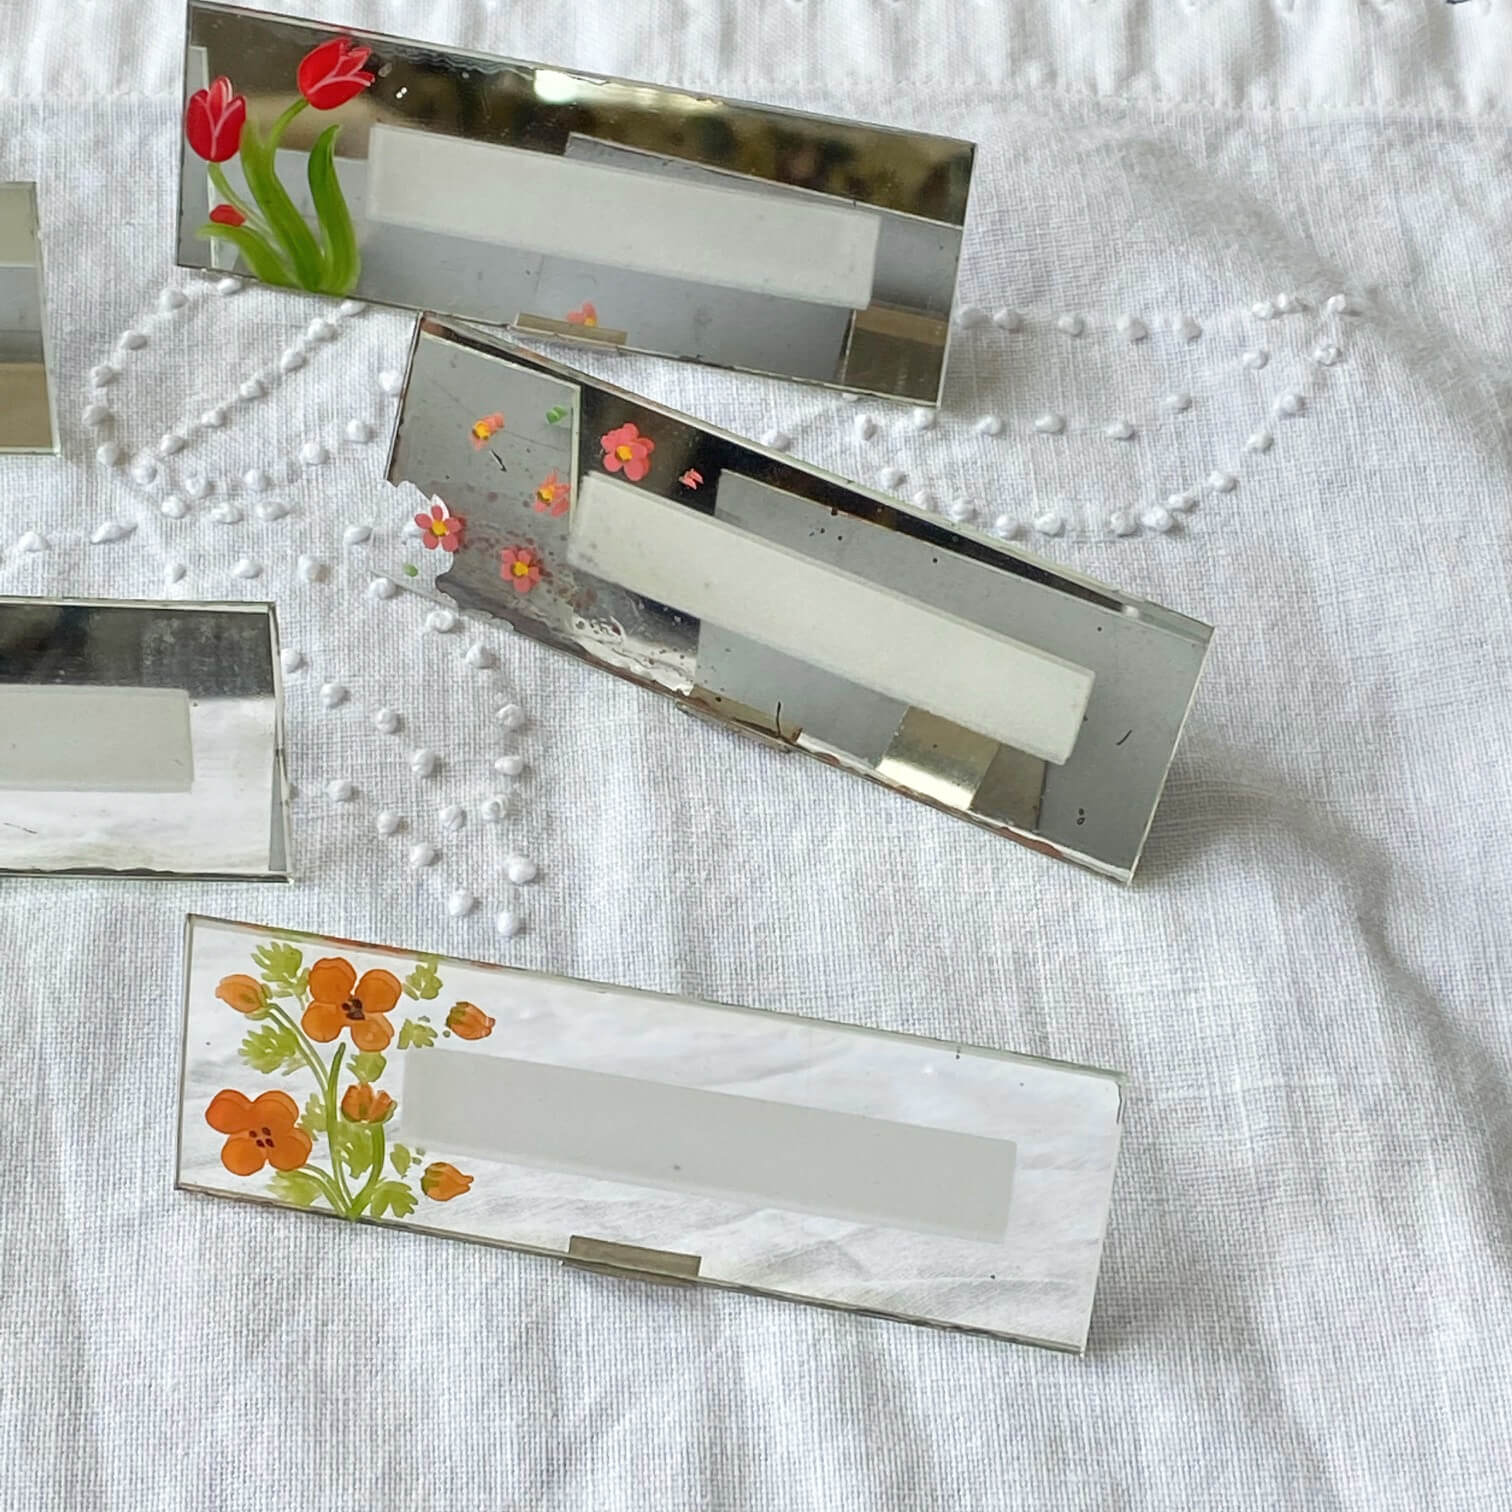 Vintage Floral Place Cards - Mirrored Glass Set of 8 - Glass Craft Line by The Glass Craftsmen Los Angeles circa 1930s